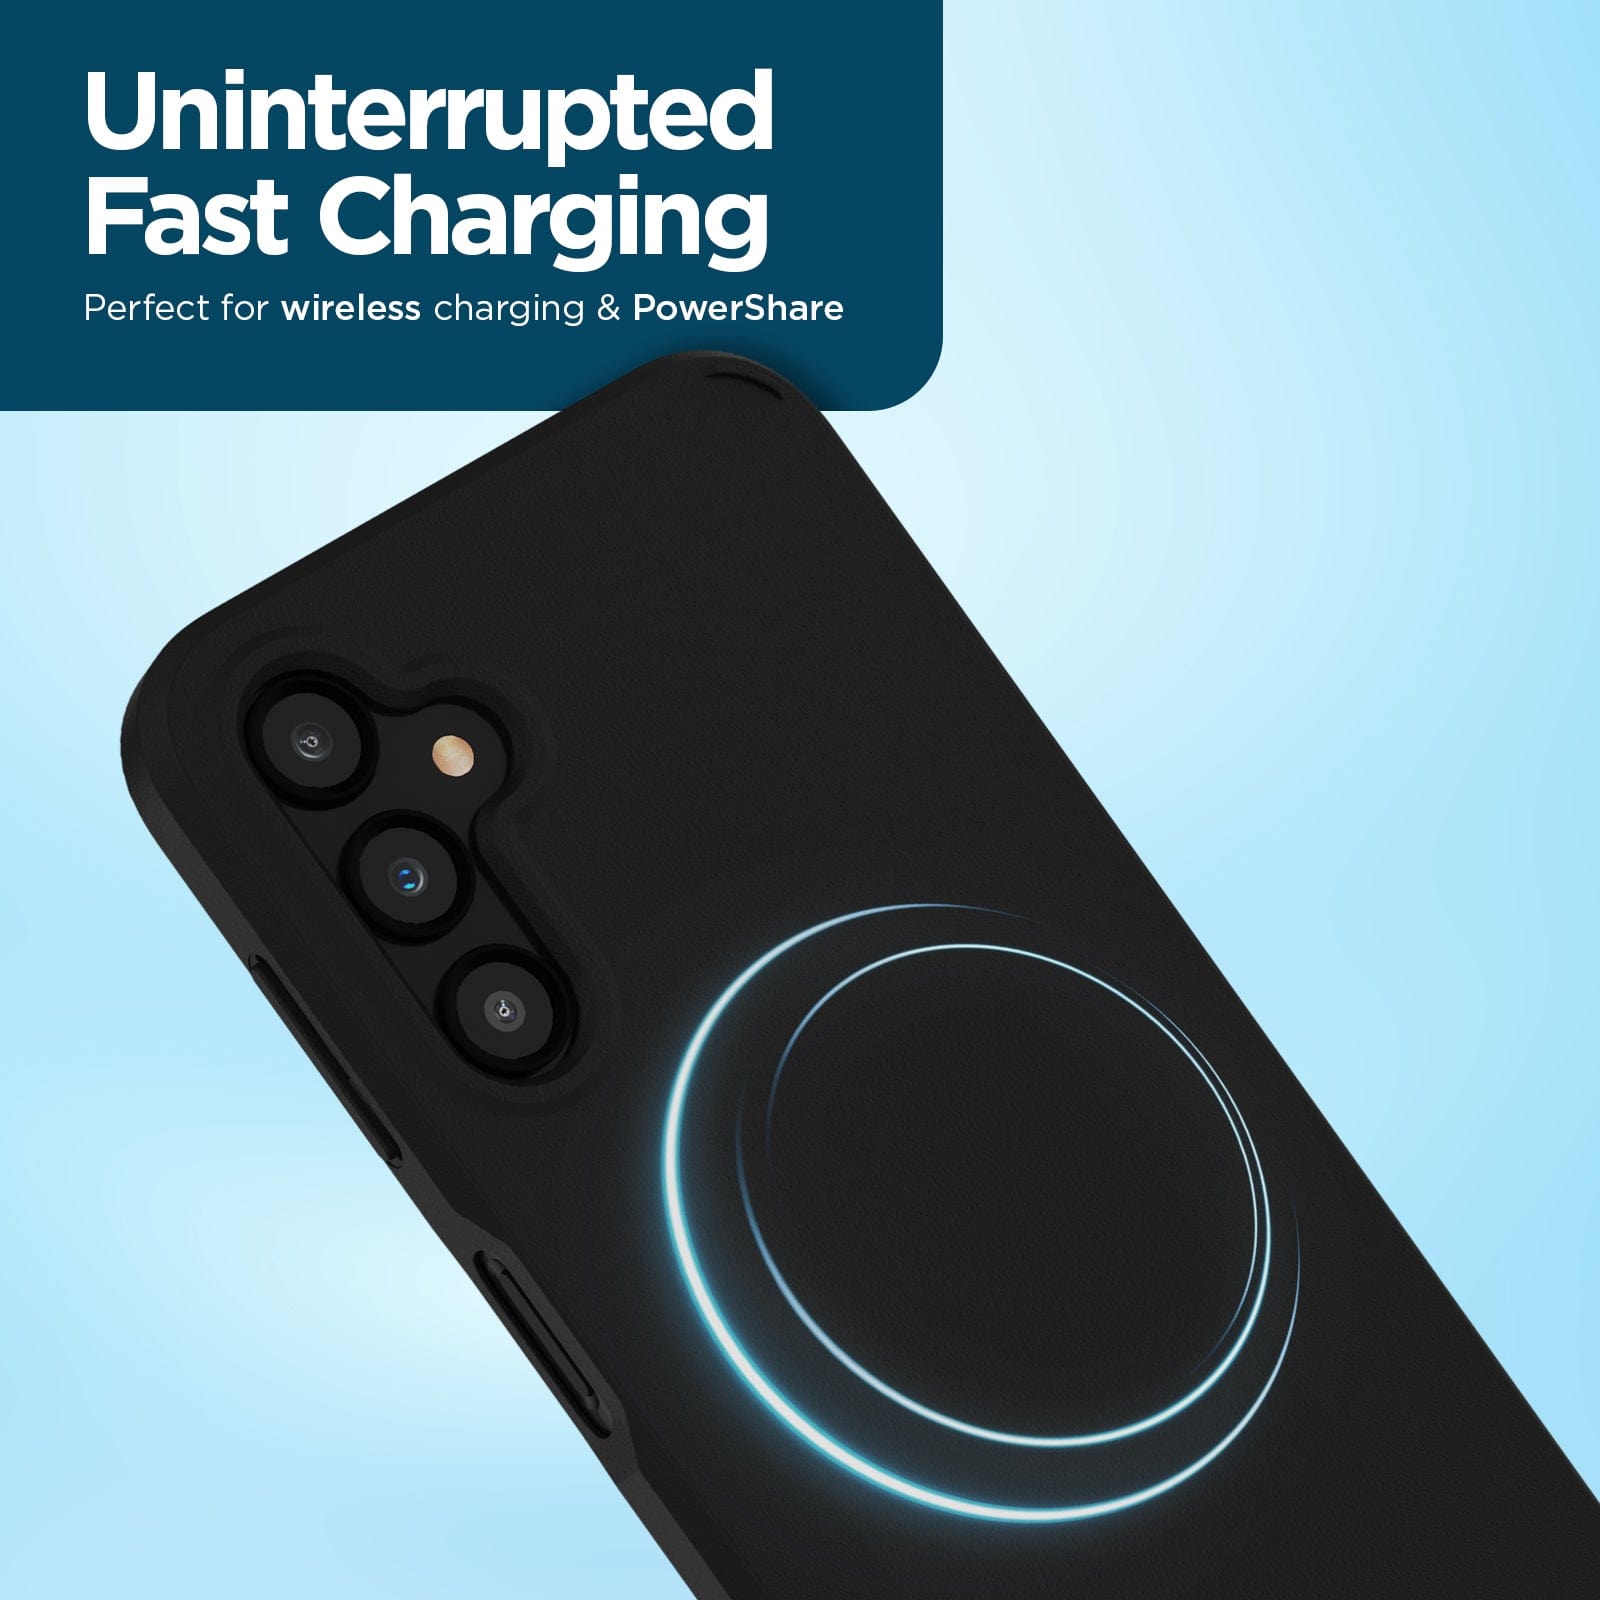 UNINTERRUPTED FAST CHARGING PERFECT FOR WIRELESS CHARGING AND POWERSHARE